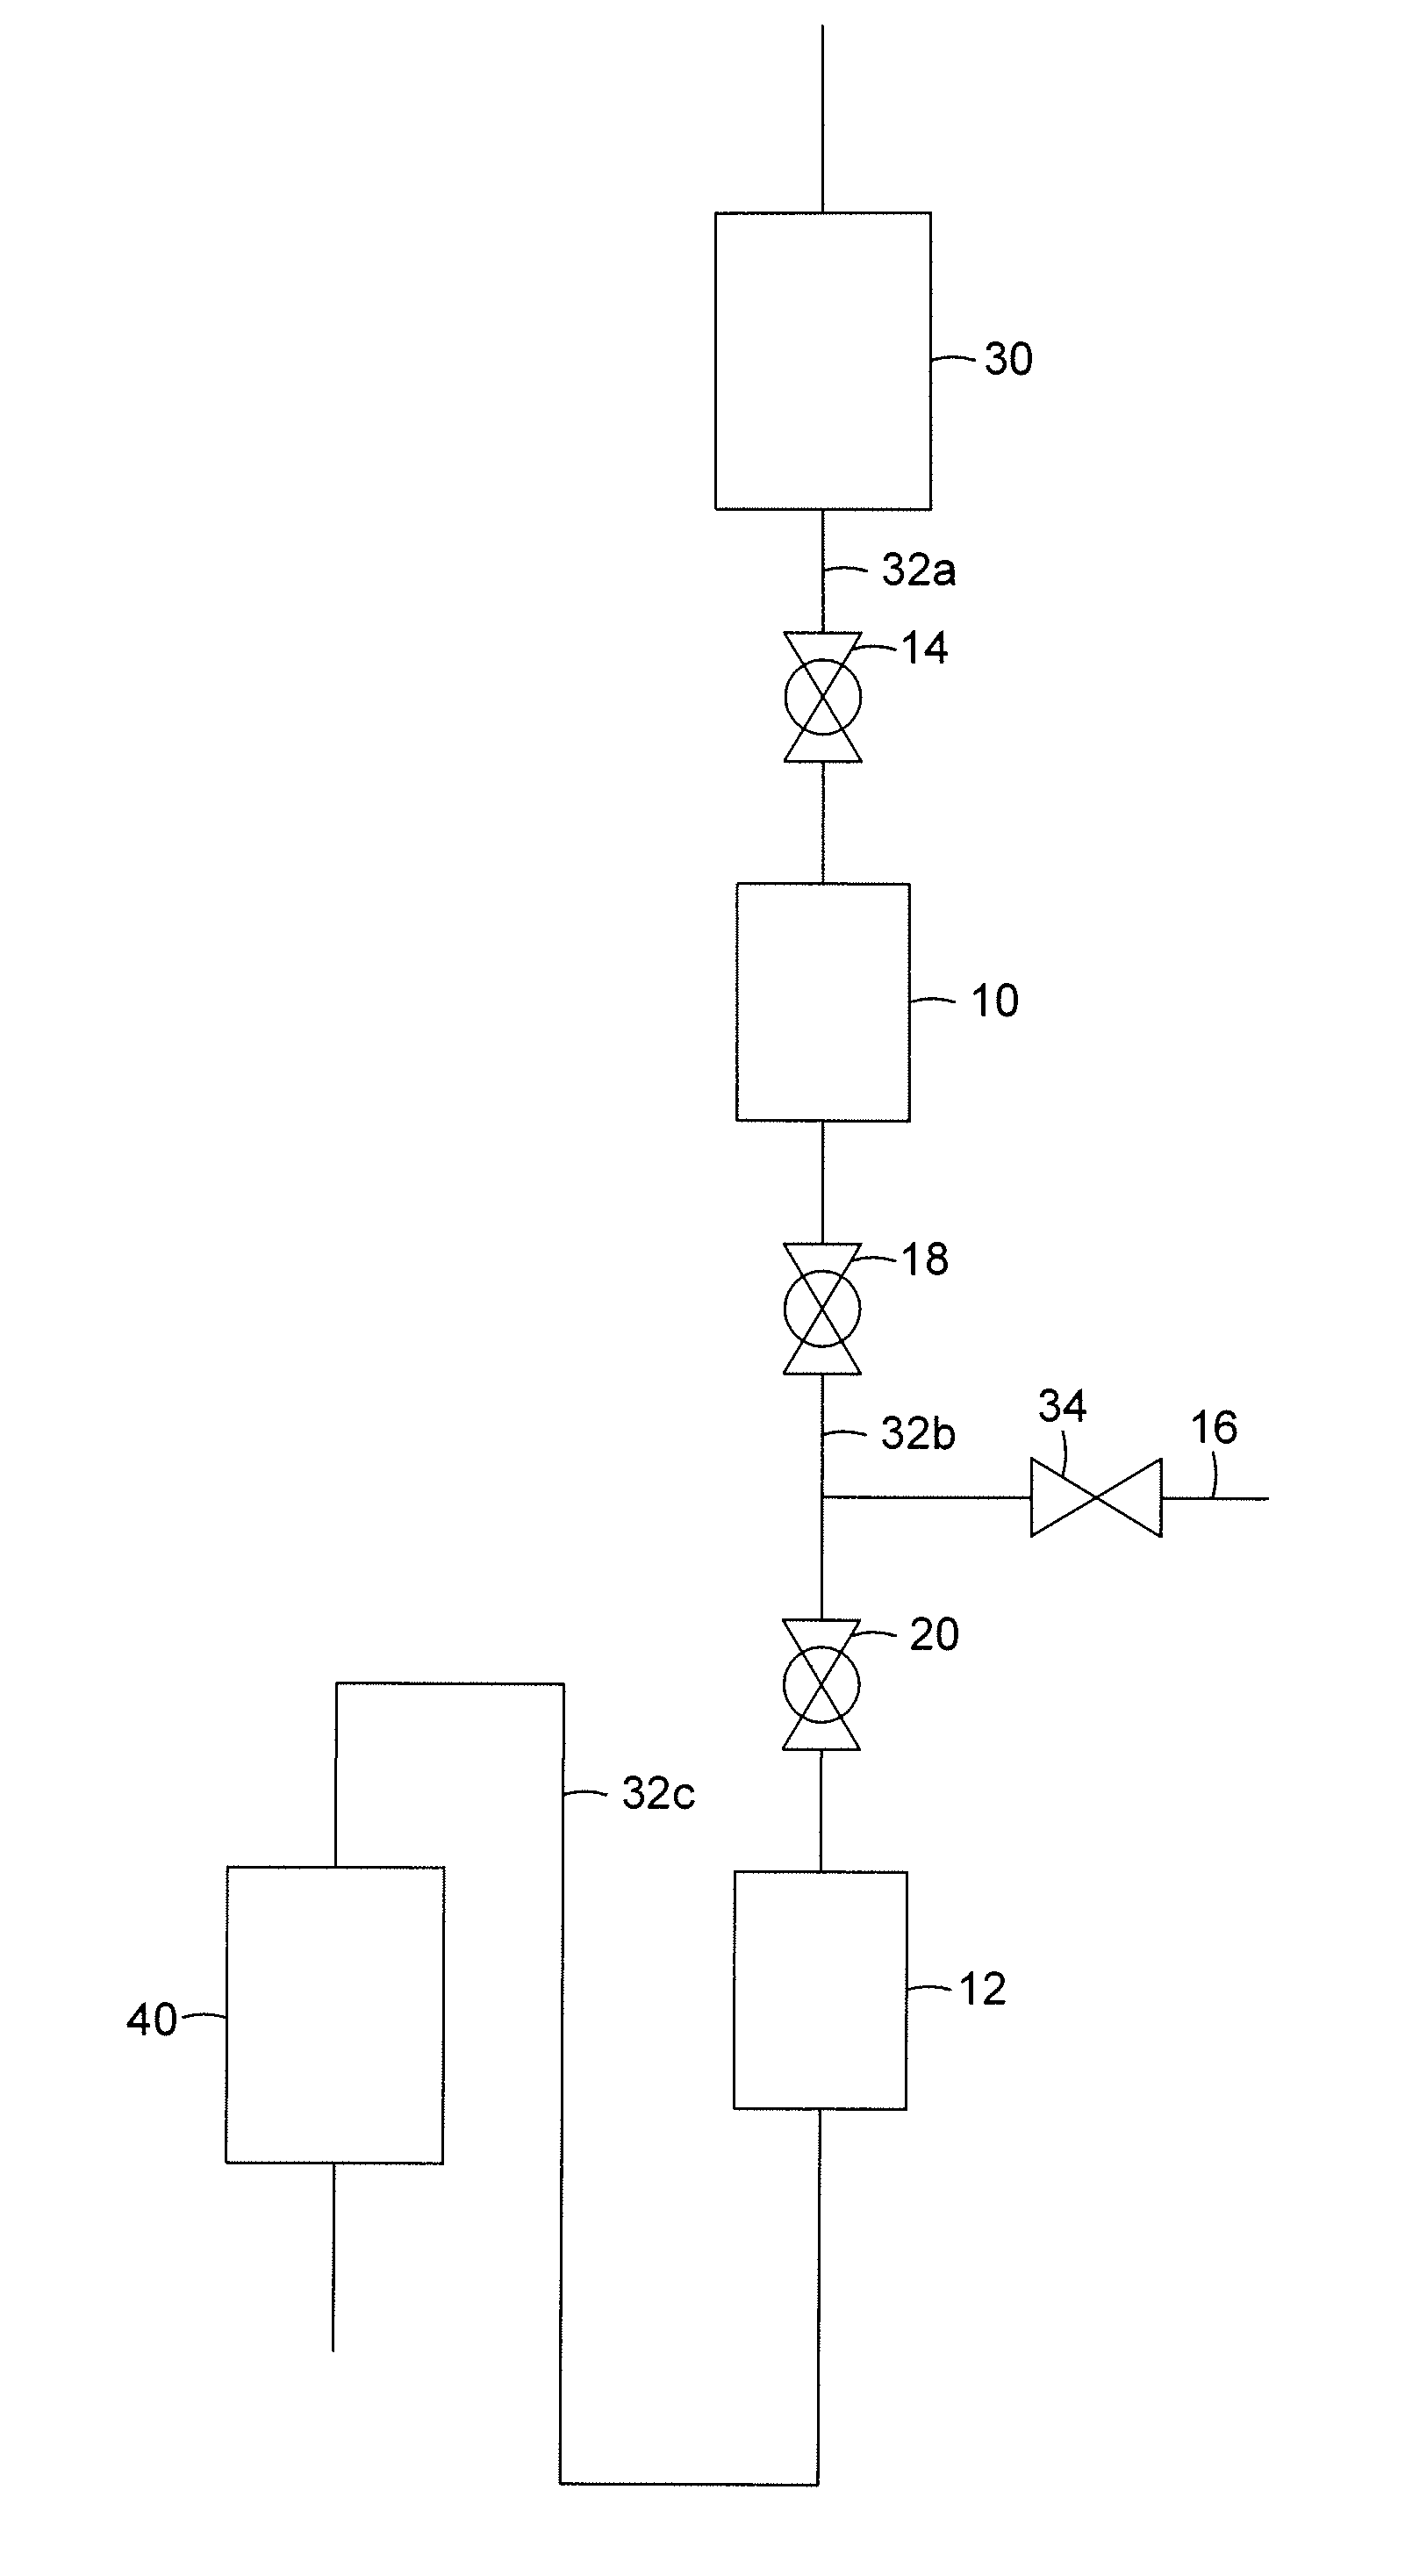 Device to Transfer Catalyst from a Low Pressure Vessel to a High Pressure Vessel and Purge the Transferred Catalyst